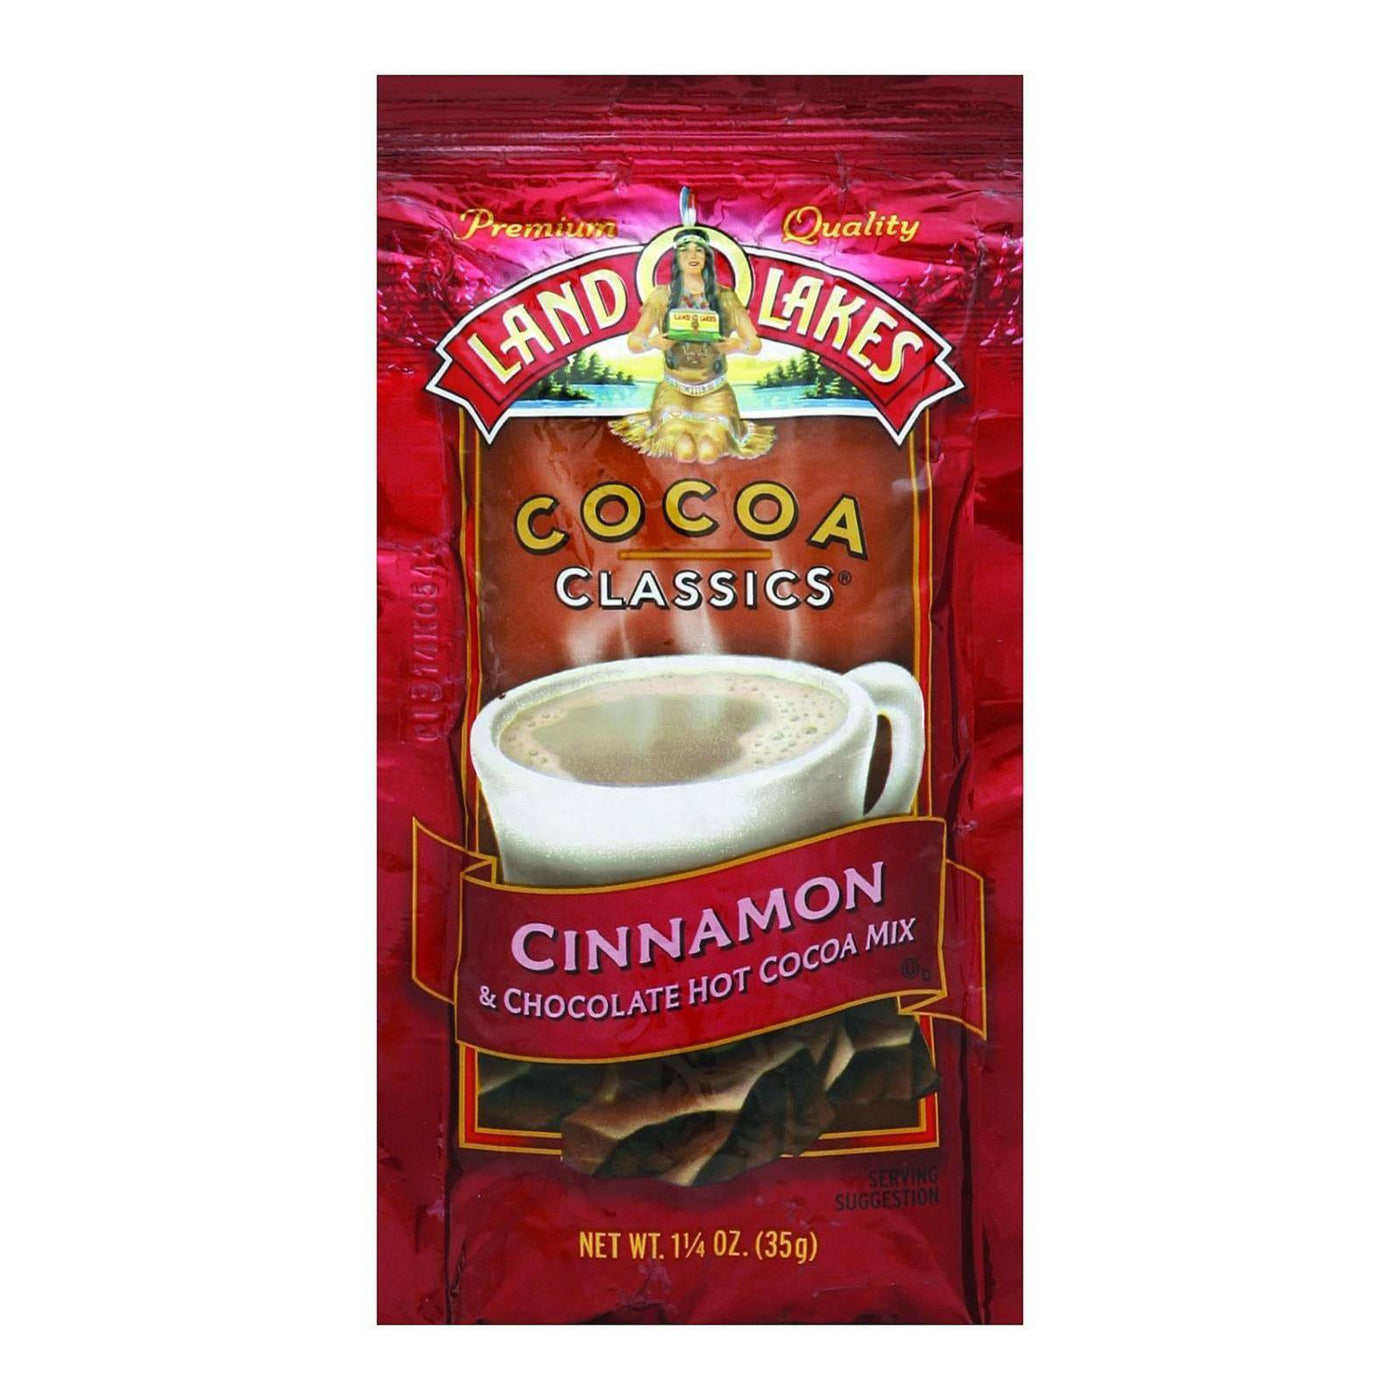 Land O Lakes Cocoa Classic Mix - Cinnamon And Chocolate - 1.25 Oz - Case Of 12 | OnlyNaturals.us